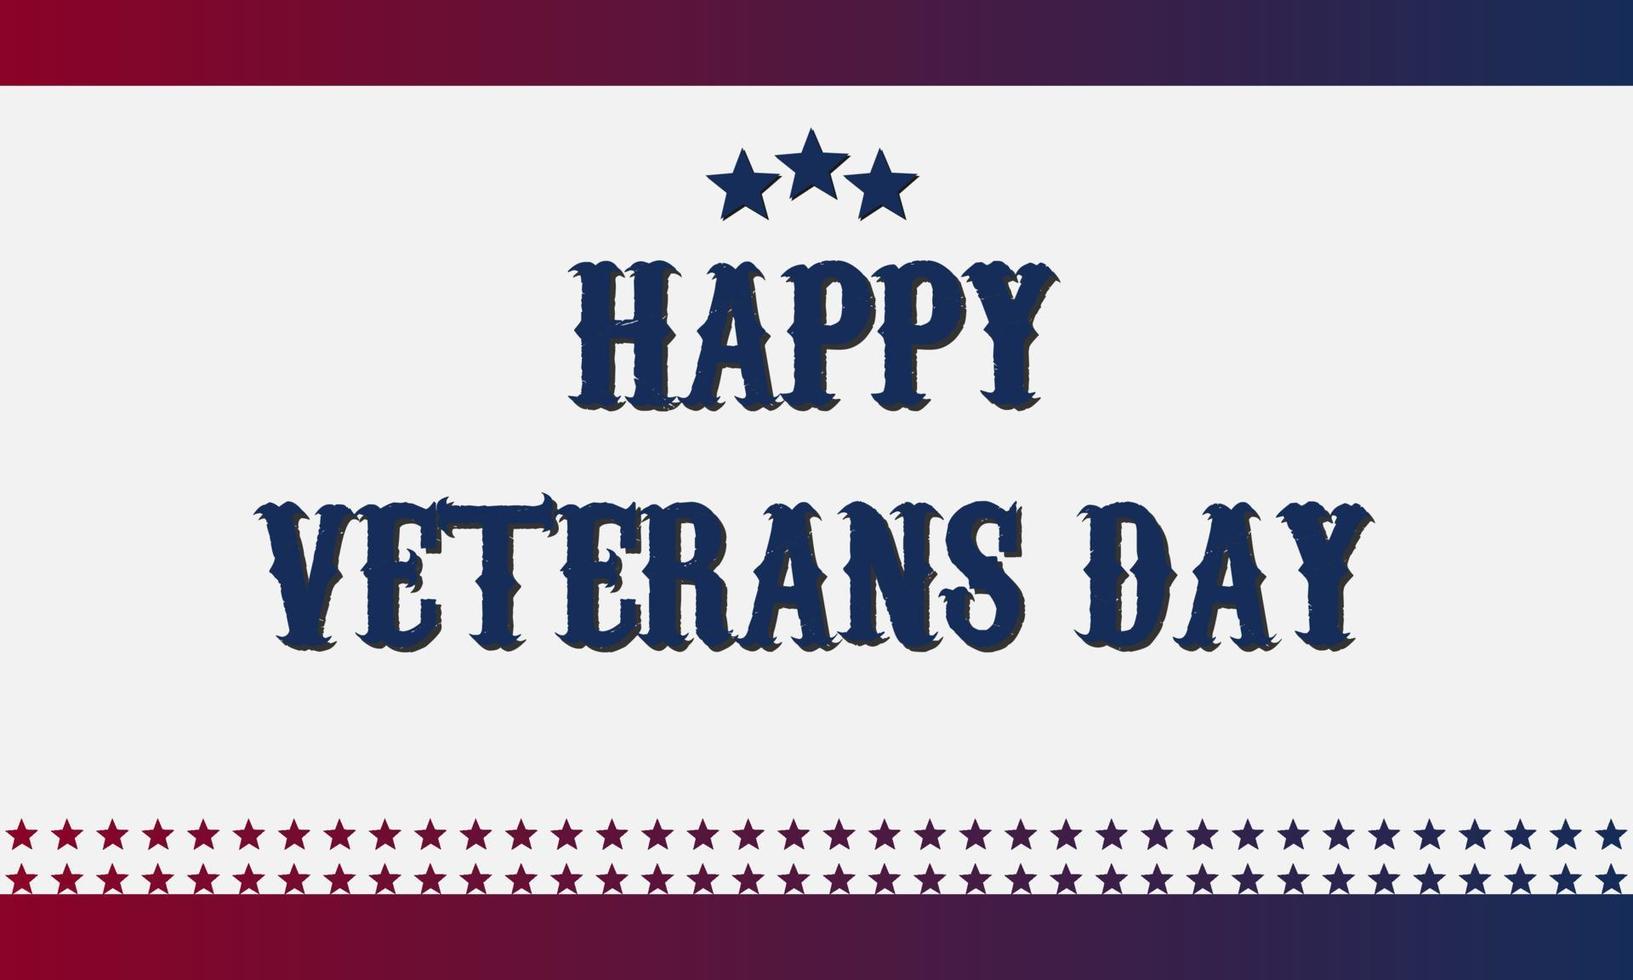 Veterans Day Background with Silhouette of a veteran soldier, and Copy Room Area. Suitable to be placed on content with that theme. vector